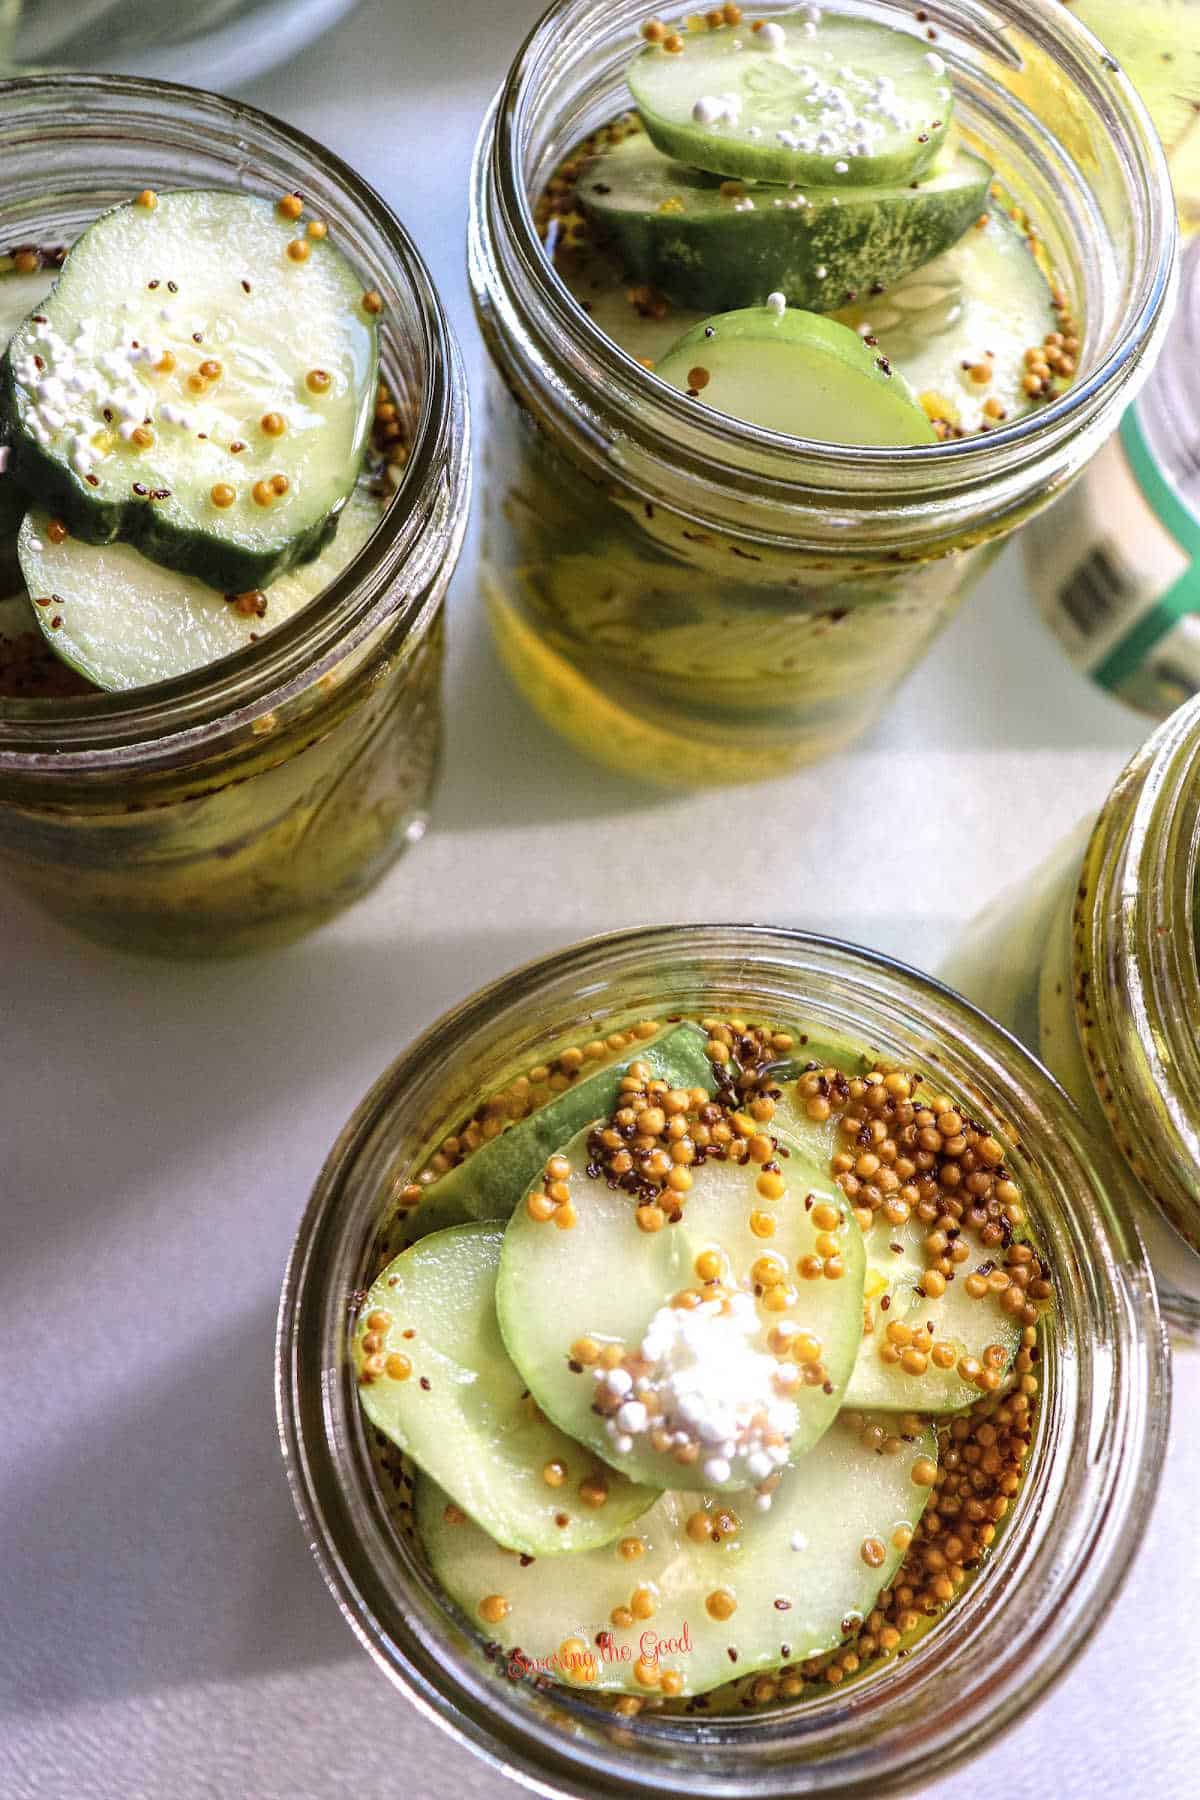 adding spices to the sliced cucumbers in the canning jars, top down image